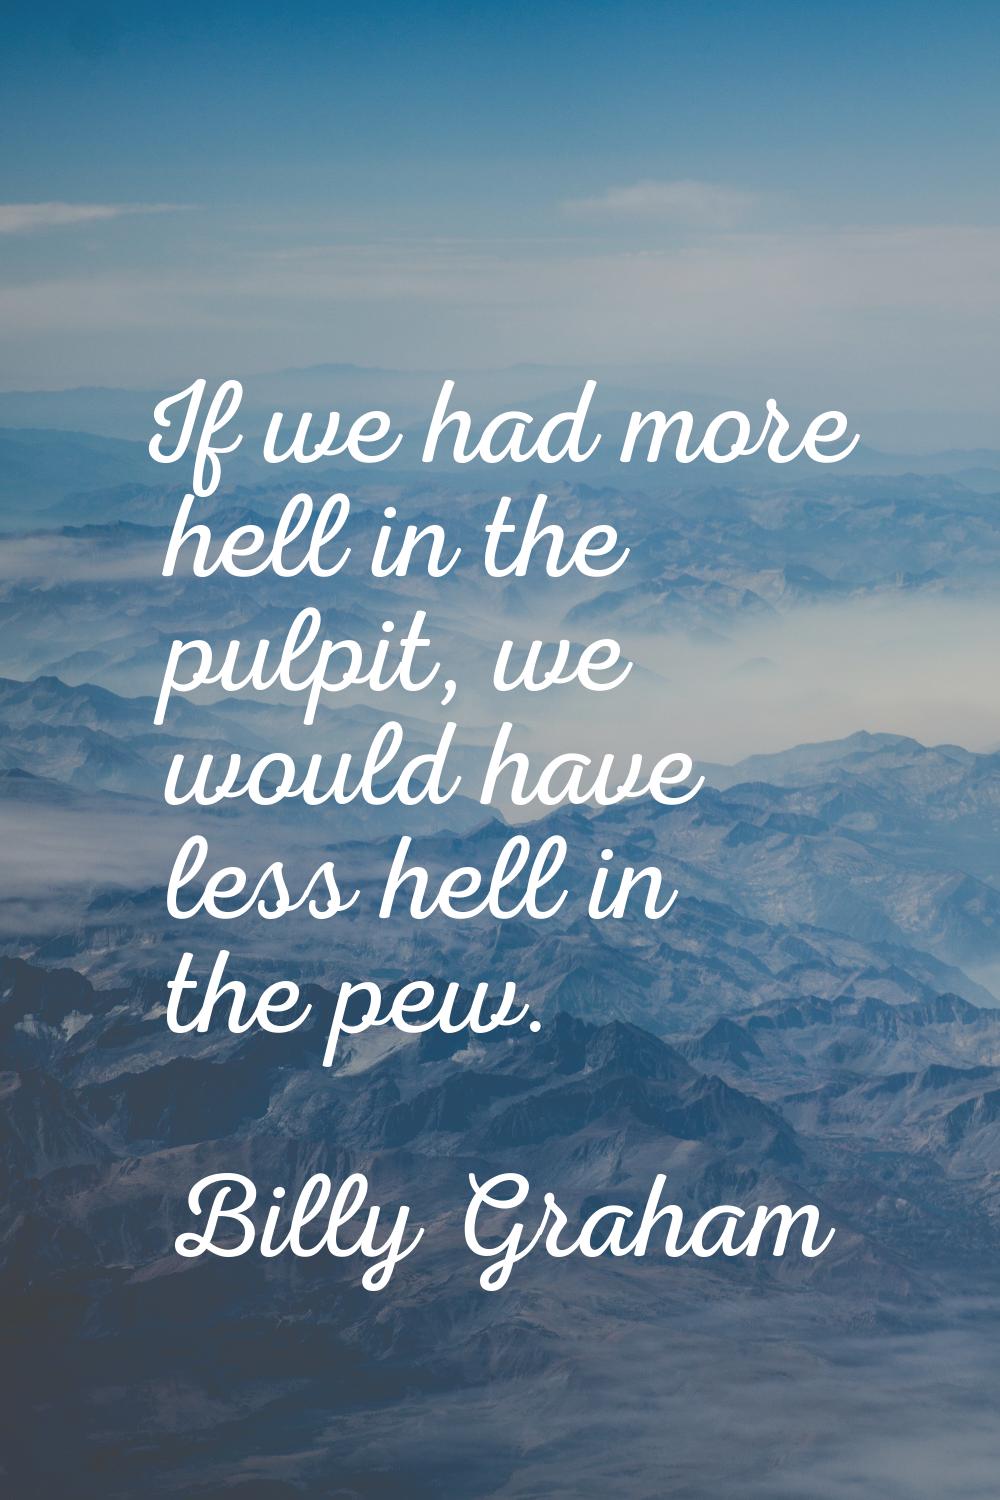 If we had more hell in the pulpit, we would have less hell in the pew.